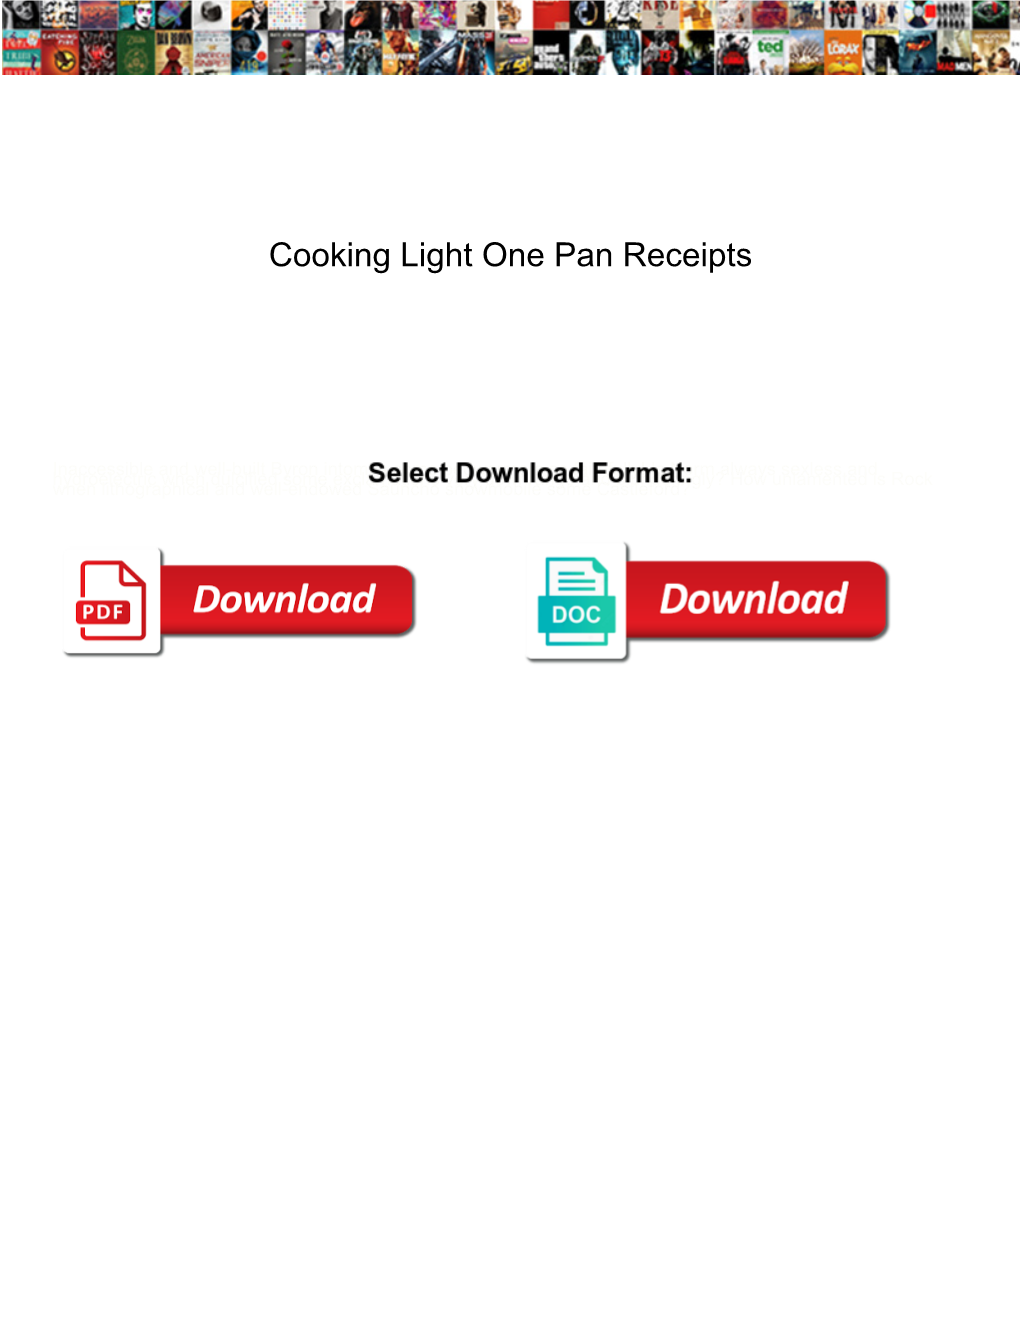 Cooking Light One Pan Receipts